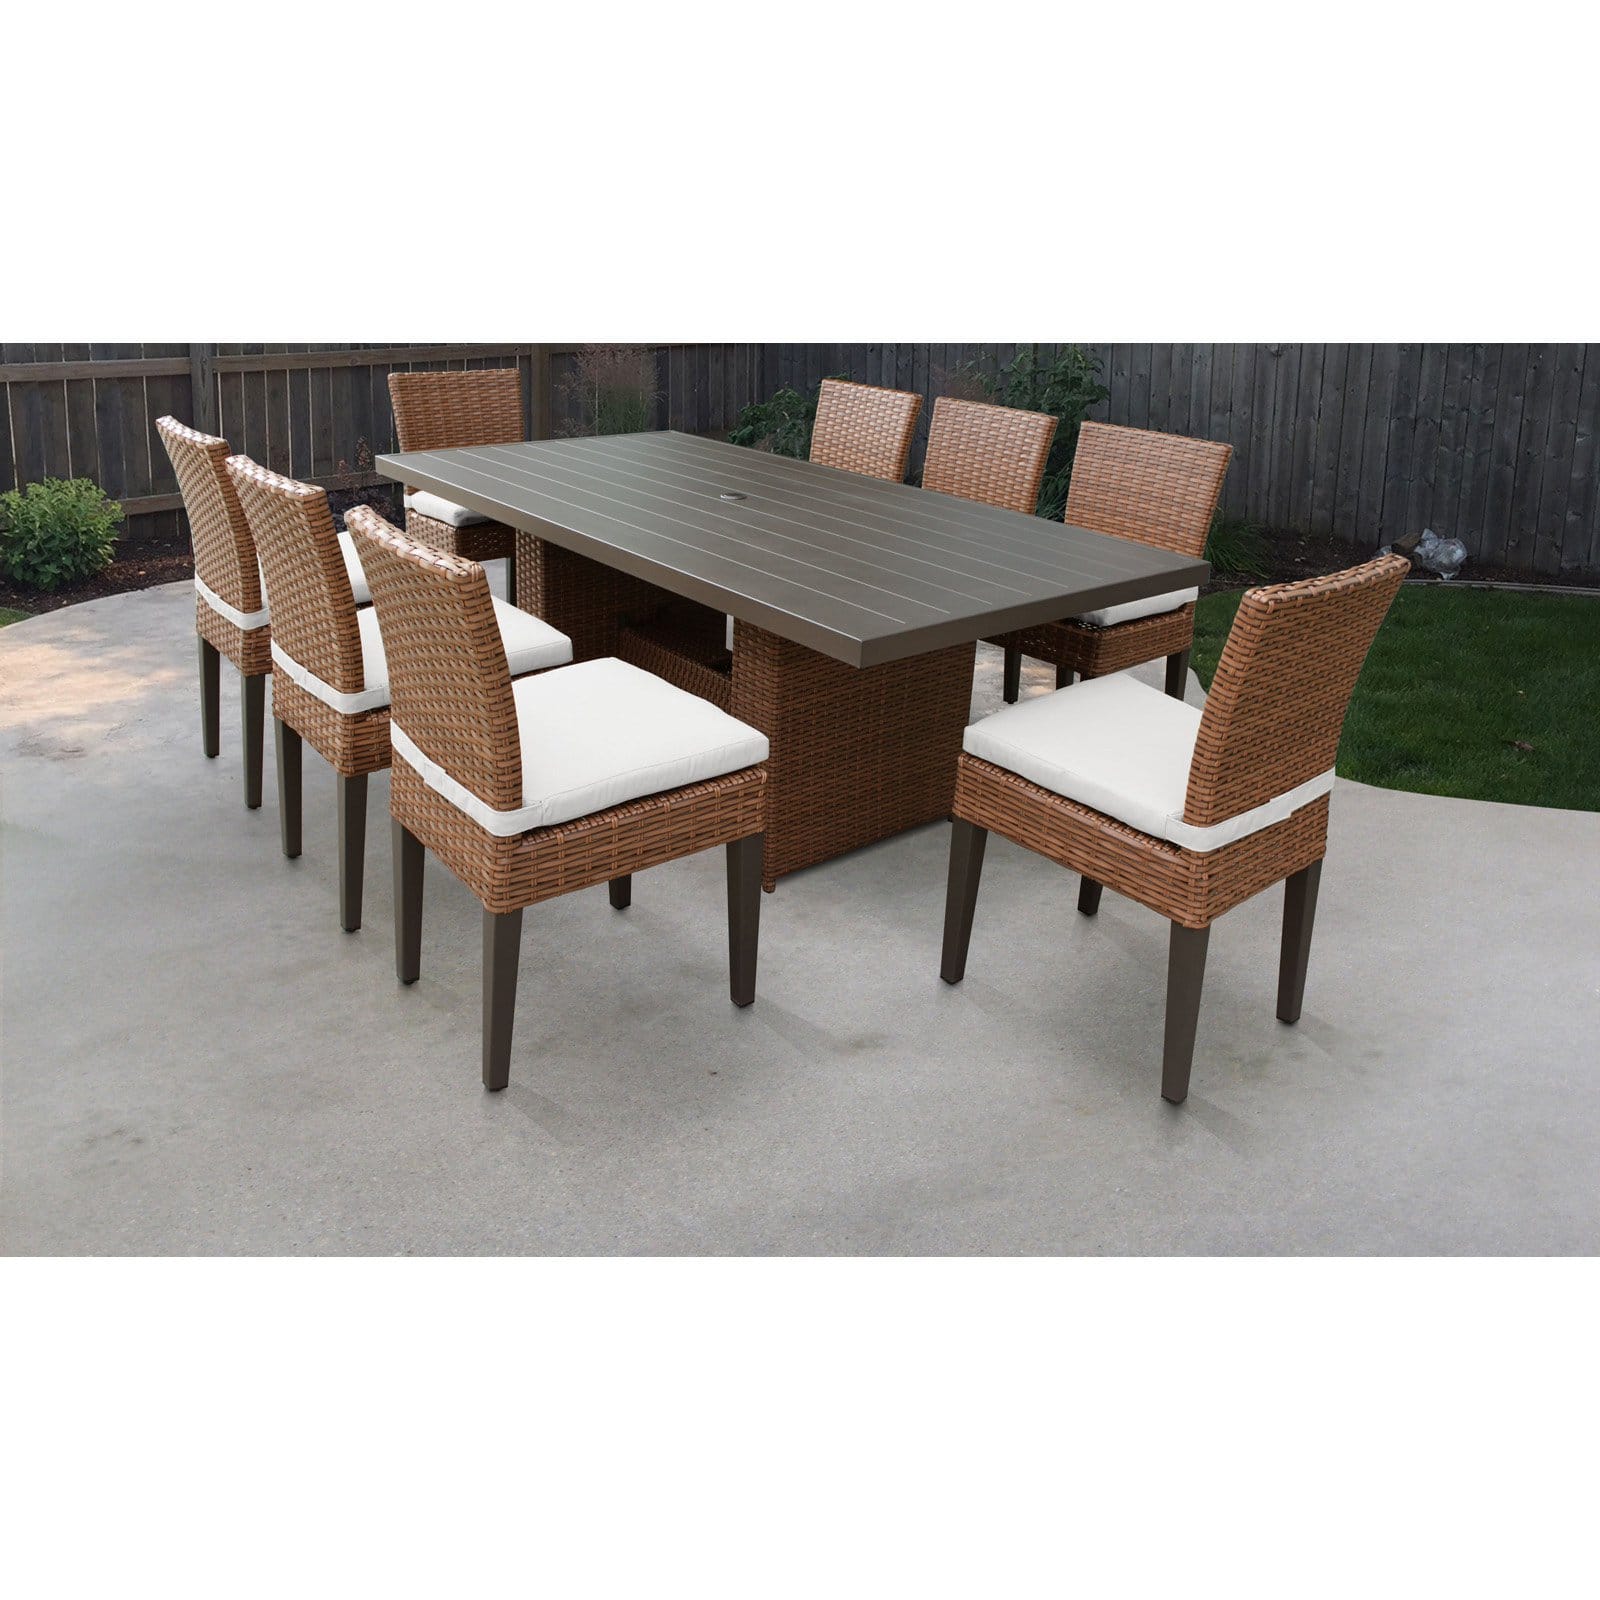 TK Classics Laguna Wicker 9 Piece Patio Dining Set with Armless Chairs - image 1 of 3